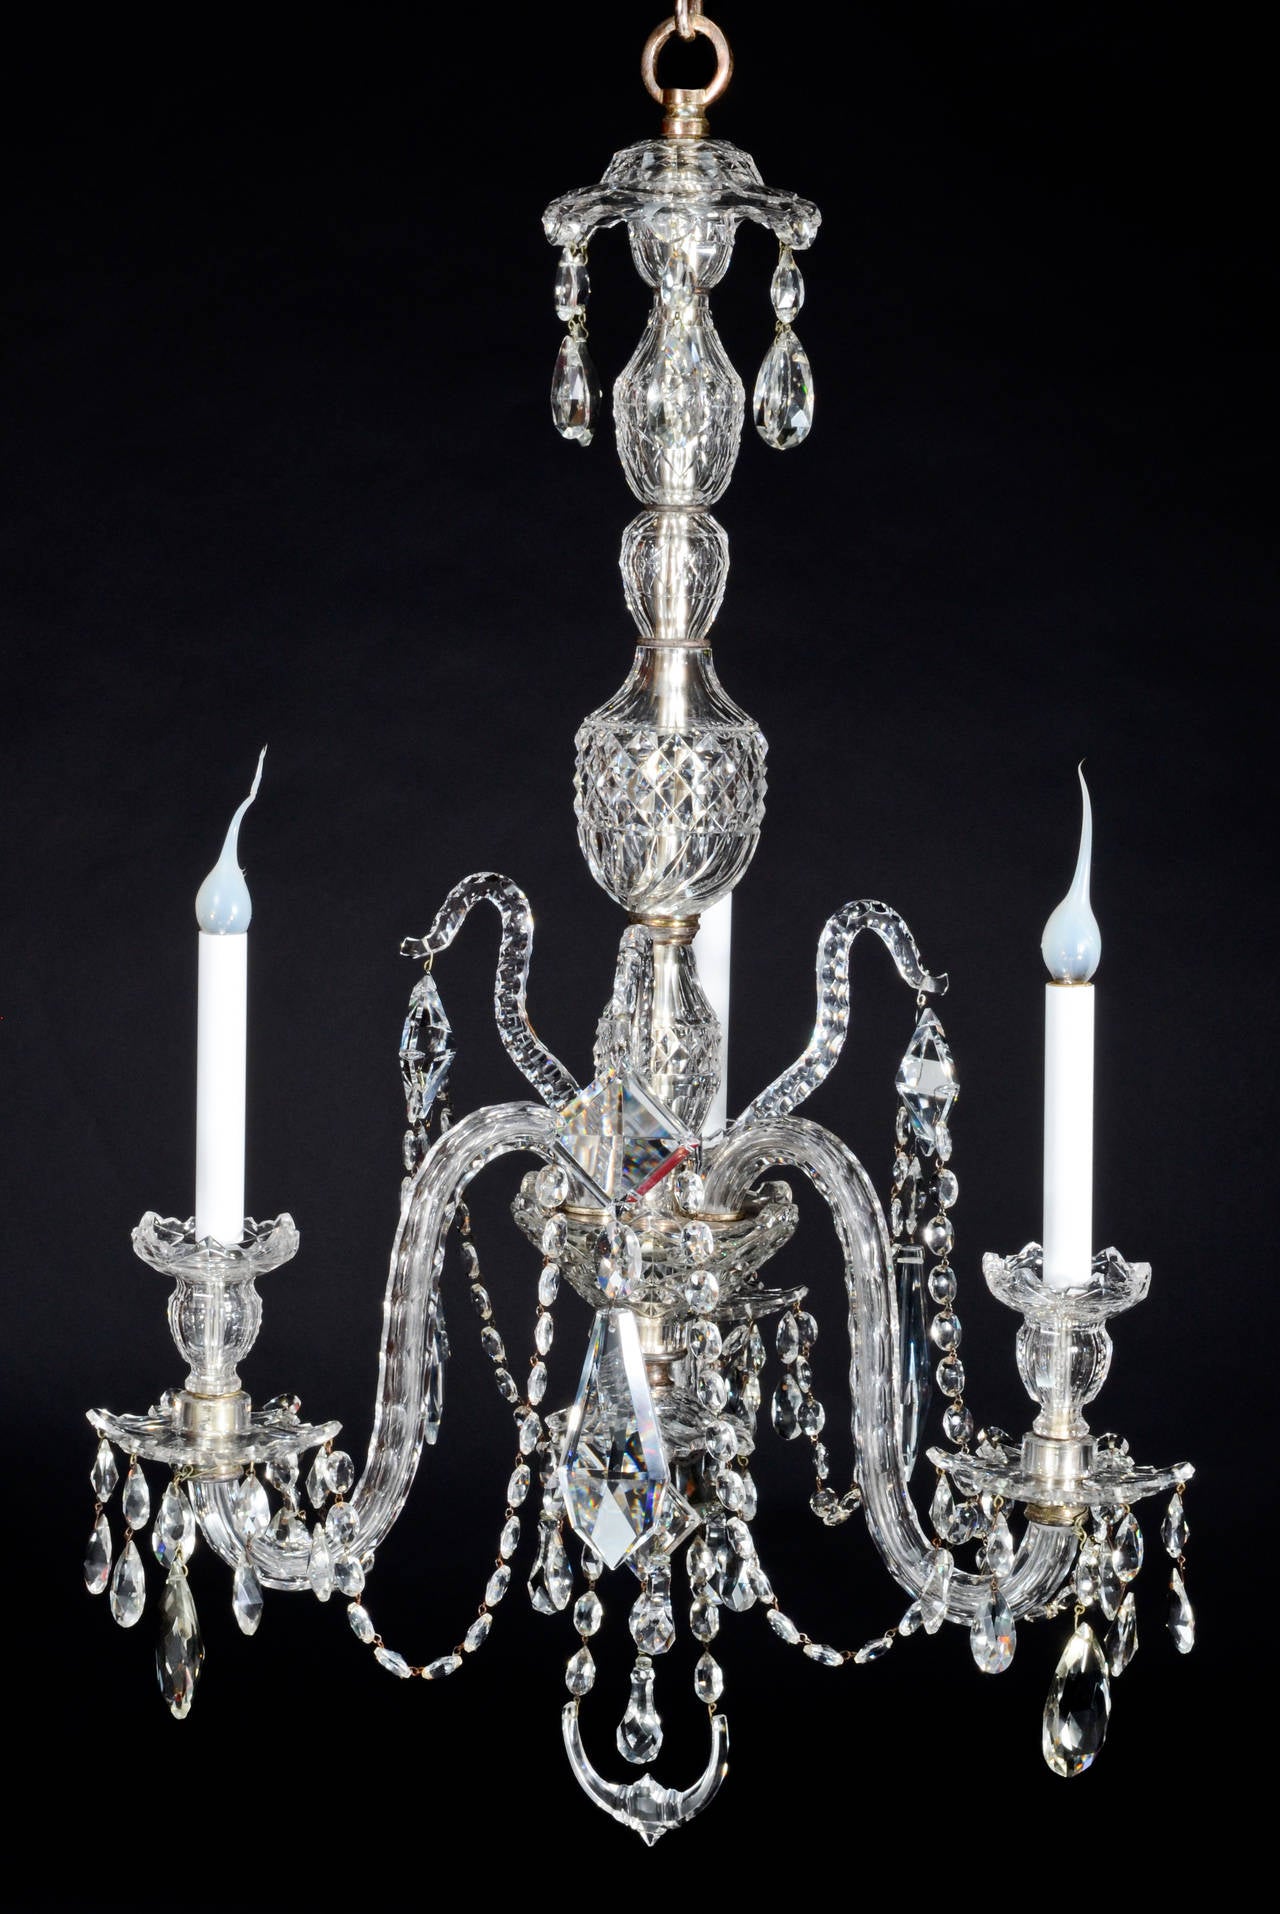 A Pair of Fine Antique English George III Cut Crystal three light chandeliers of superb quality embellished with cut crystal prisms and chains.